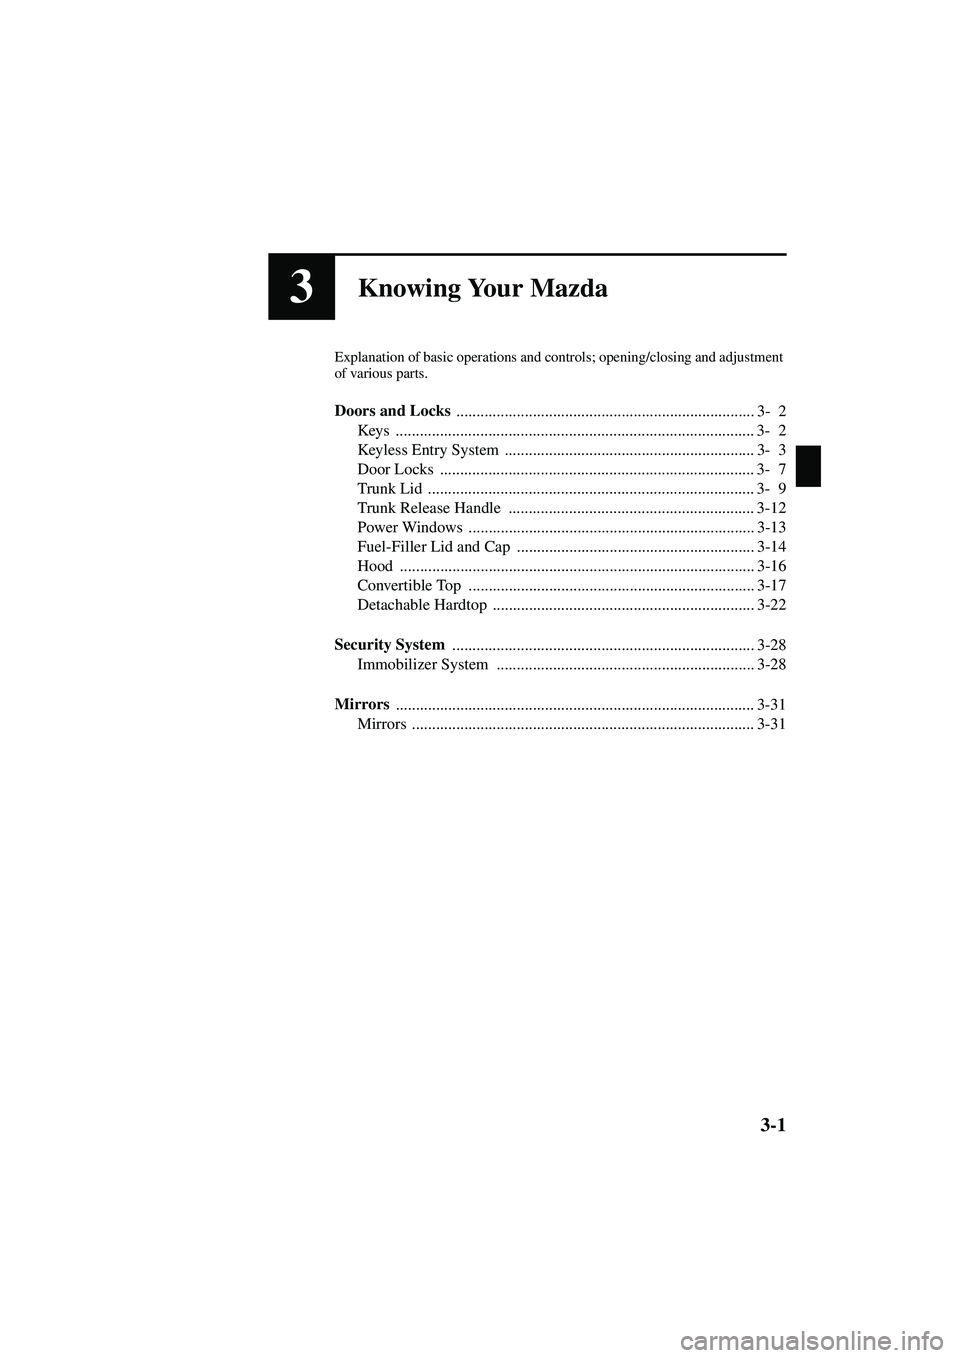 MAZDA MODEL MX-5 MIATA 2003 Owners Guide 3-1
Form No. 8R09-EA-02G
3Knowing Your Mazda
Explanation of basic operations and controls; opening/closing and adjustment 
of various parts.
Doors and Locks ...........................................